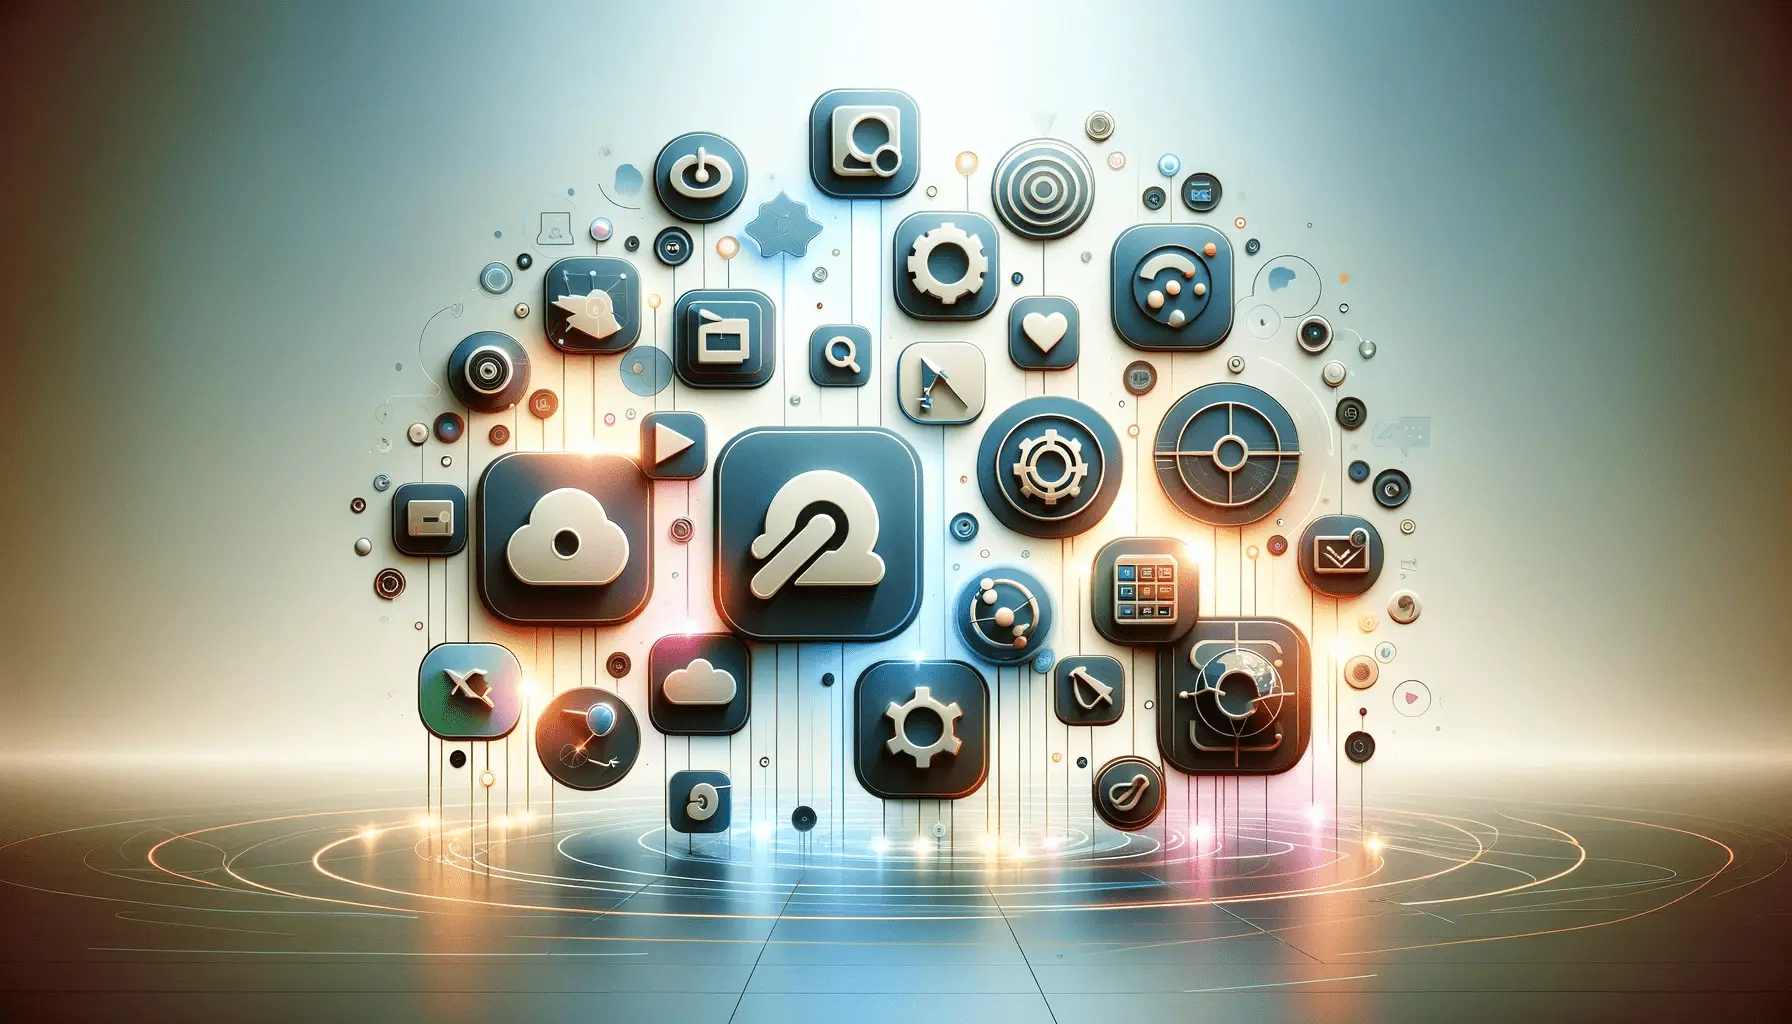 App Store Innovations: 8 Tactics to Leverage New Features and Opportunities